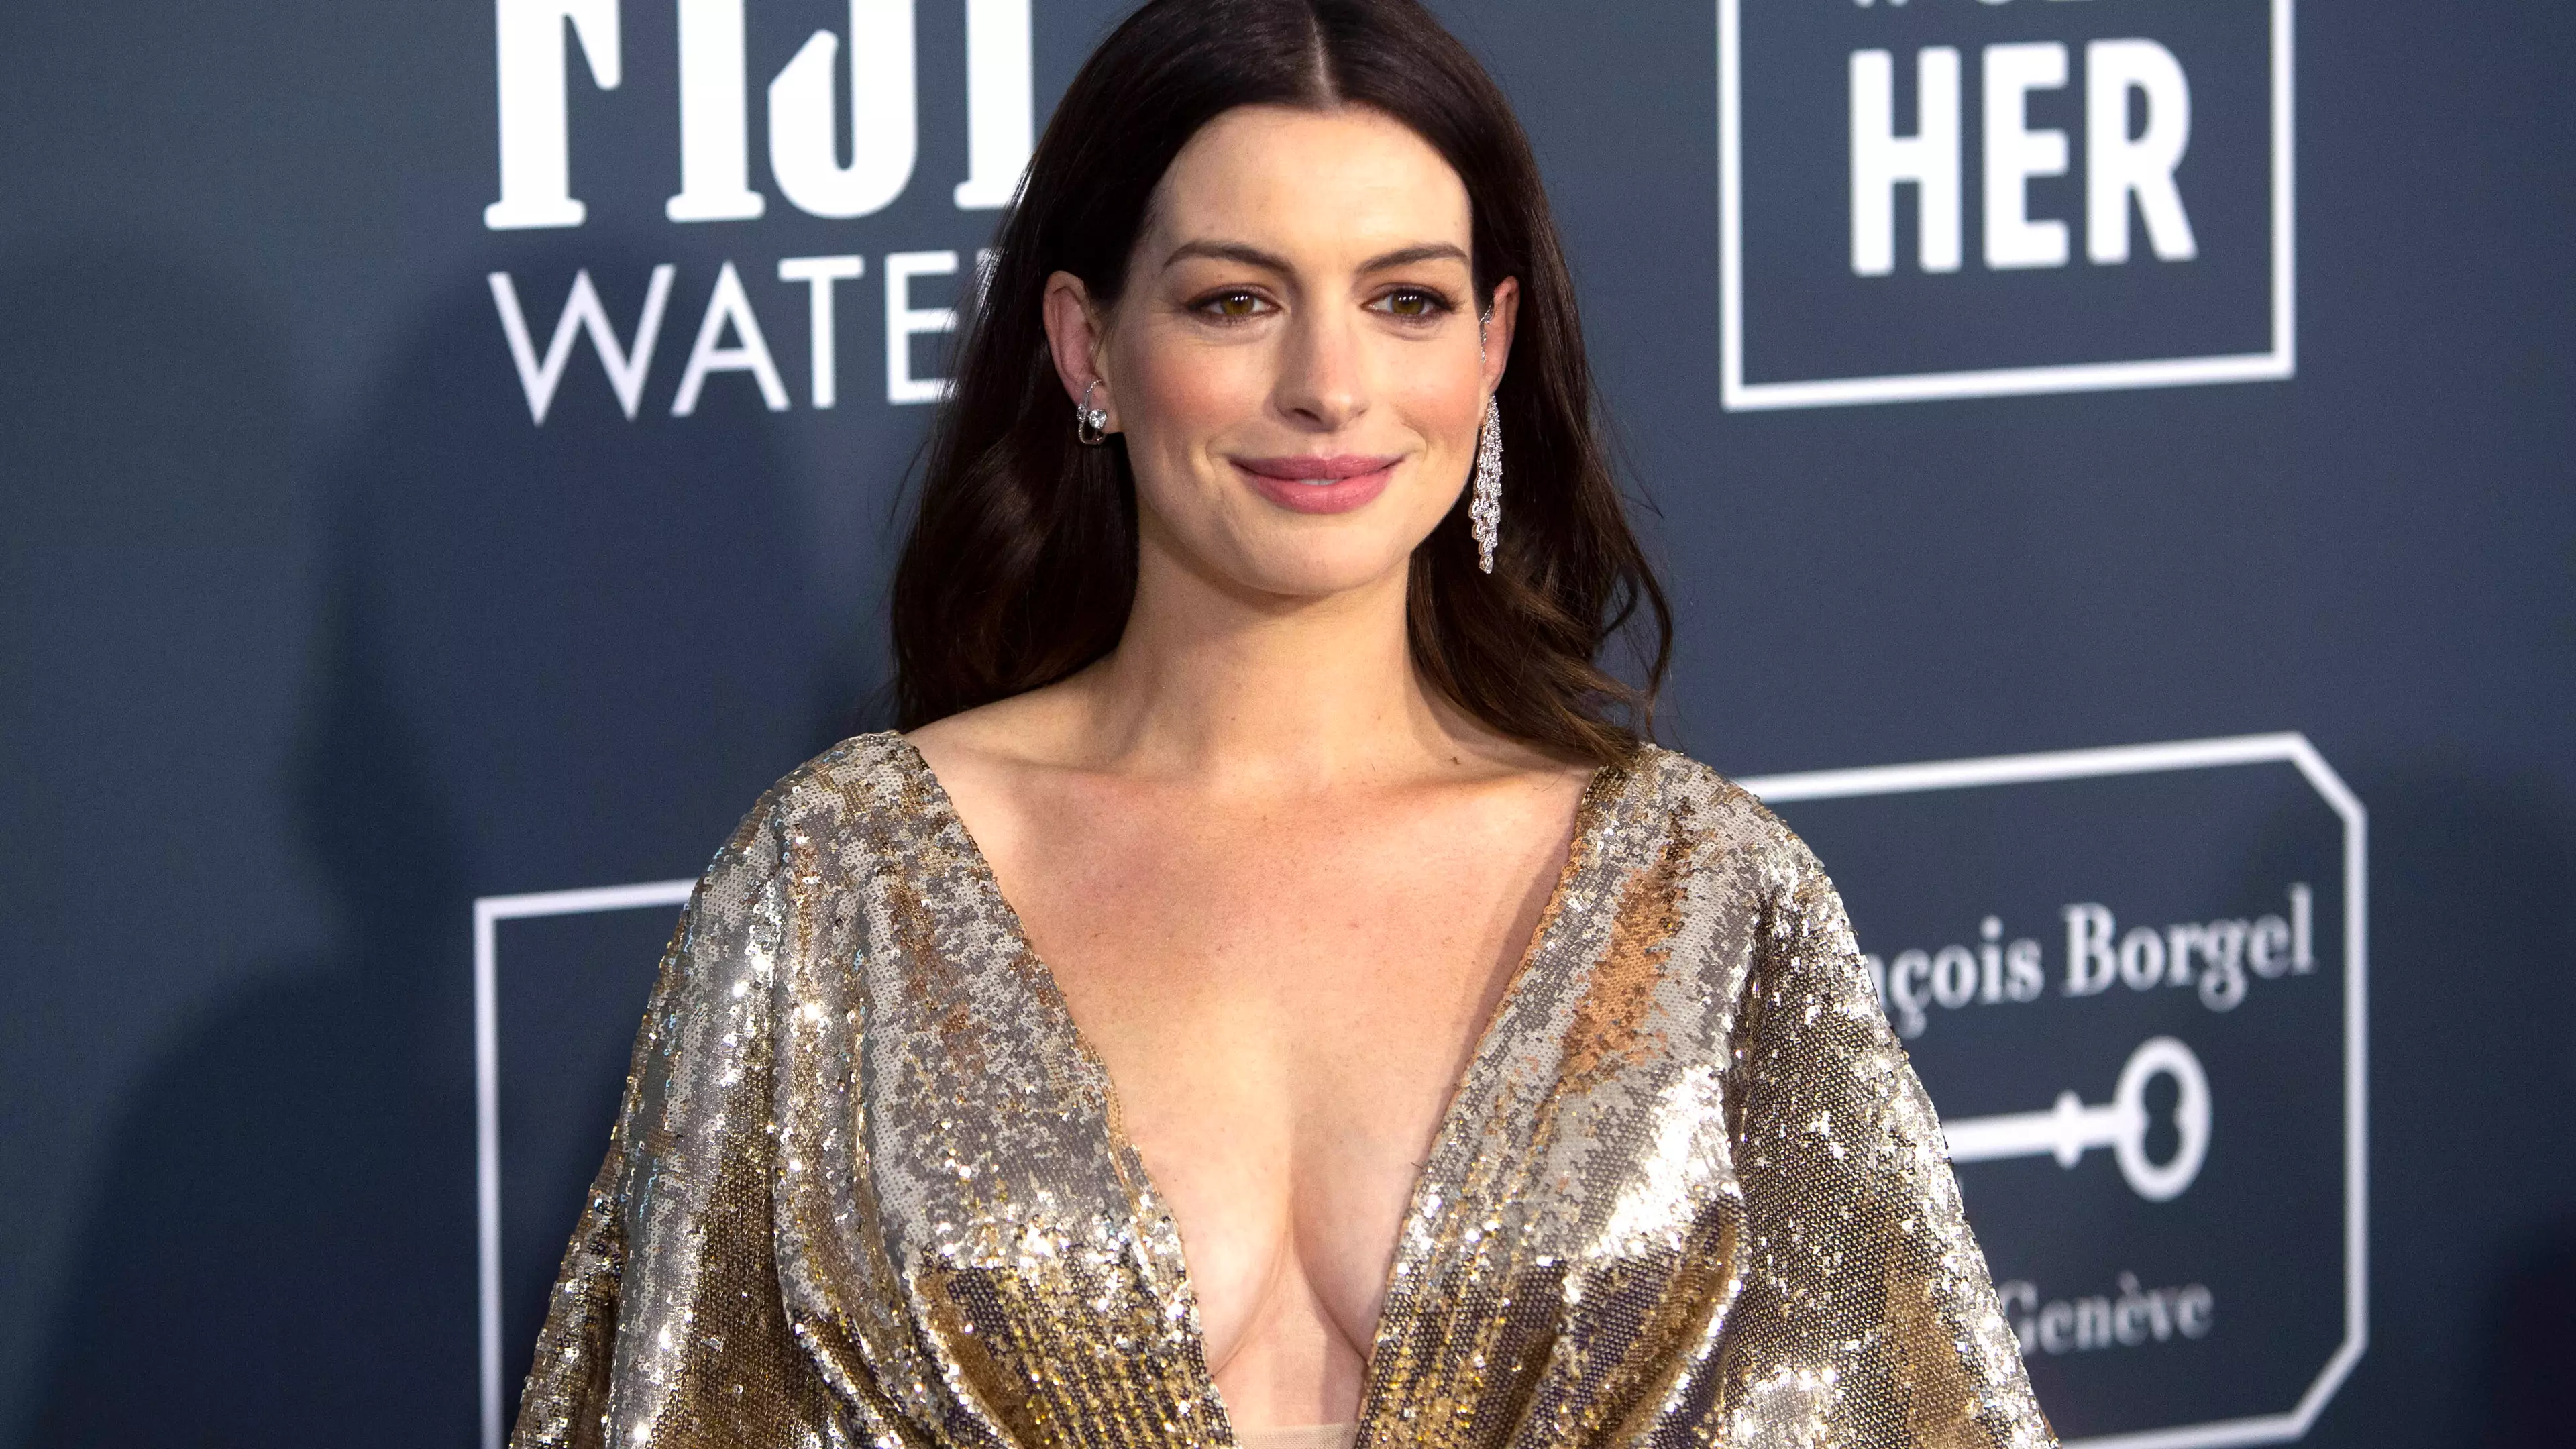 There’s A 'Creepy' Theory That Anne Hathaway’s Husband Is William Shakespeare